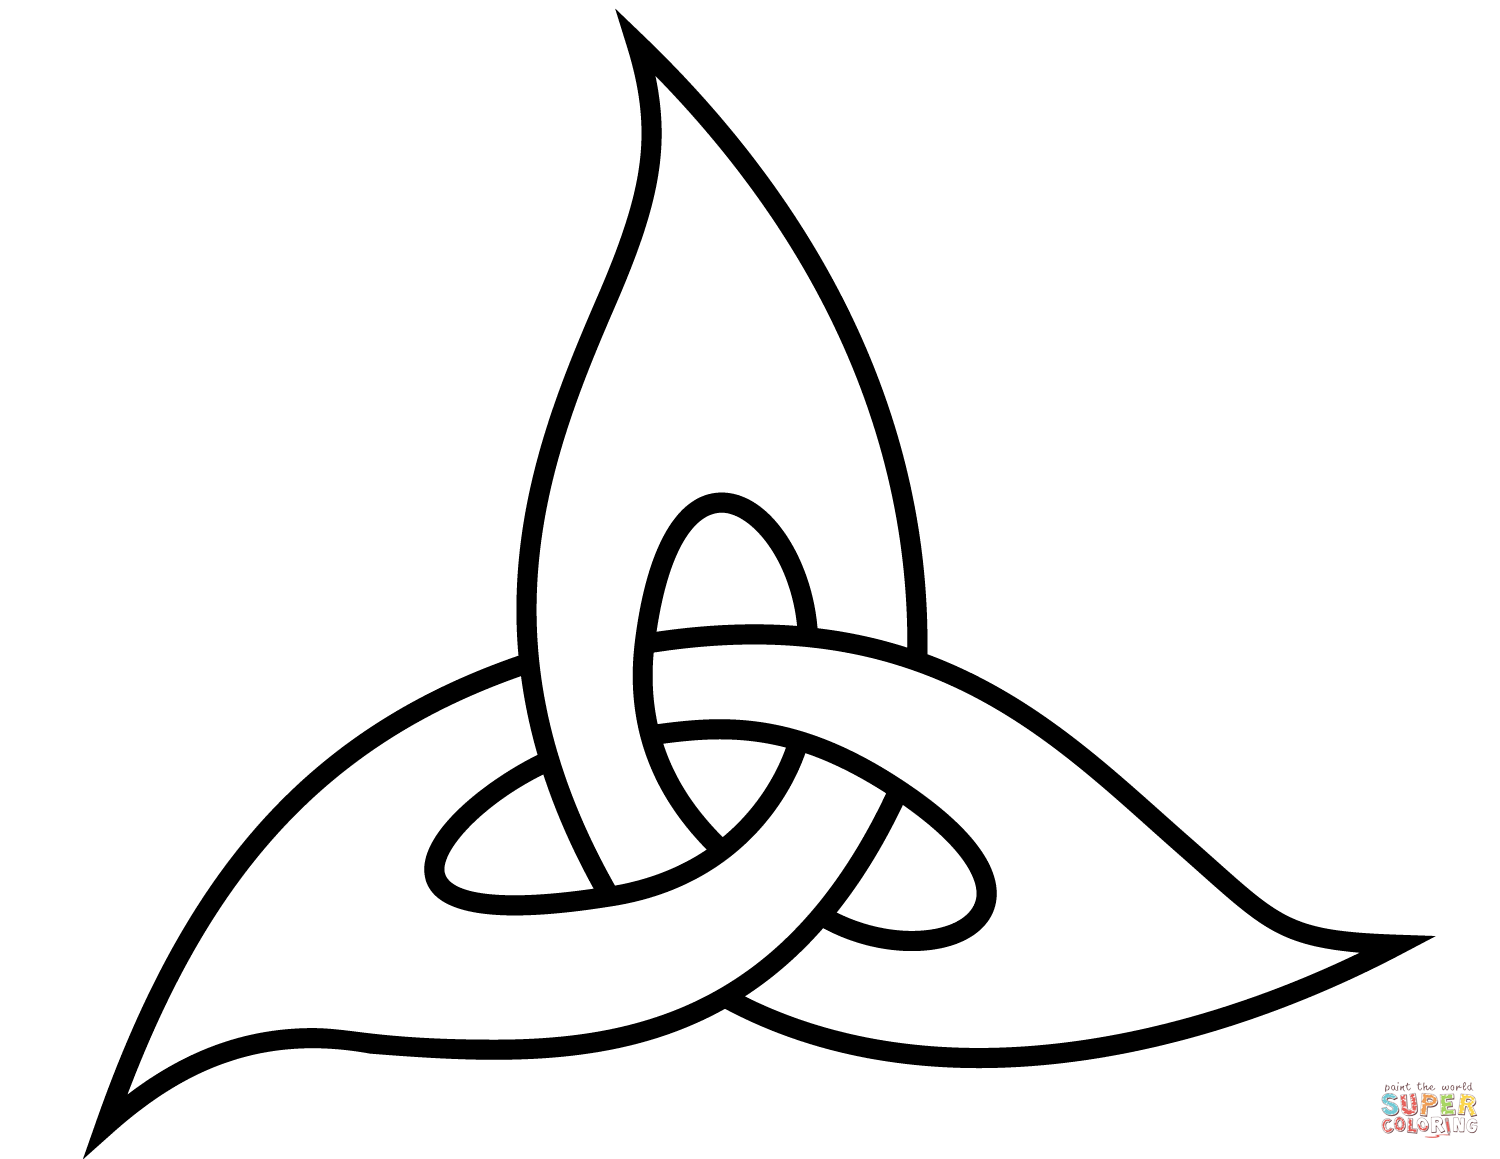 Triquetra knot coloring page free printable coloring pages